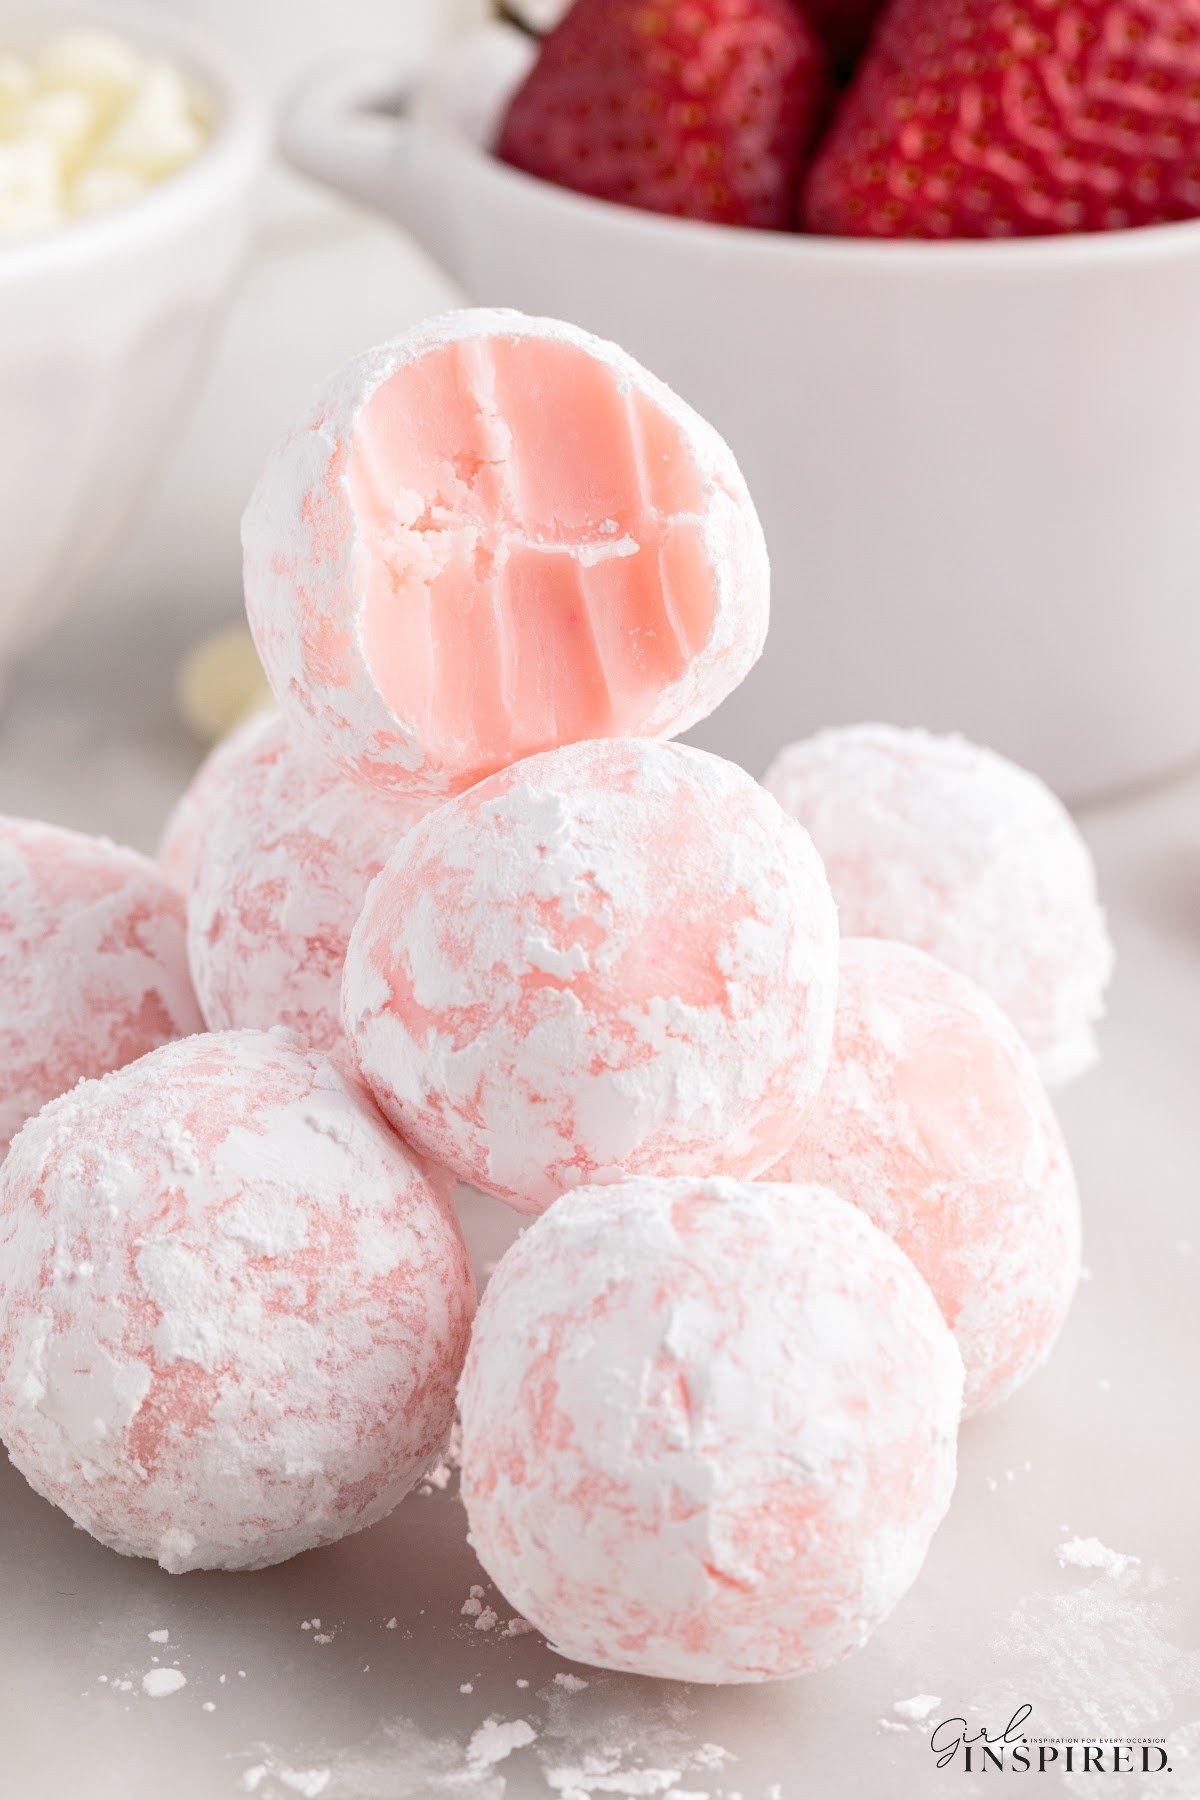 A stack of Strawberry Truffles with one on top with a bite out of it.